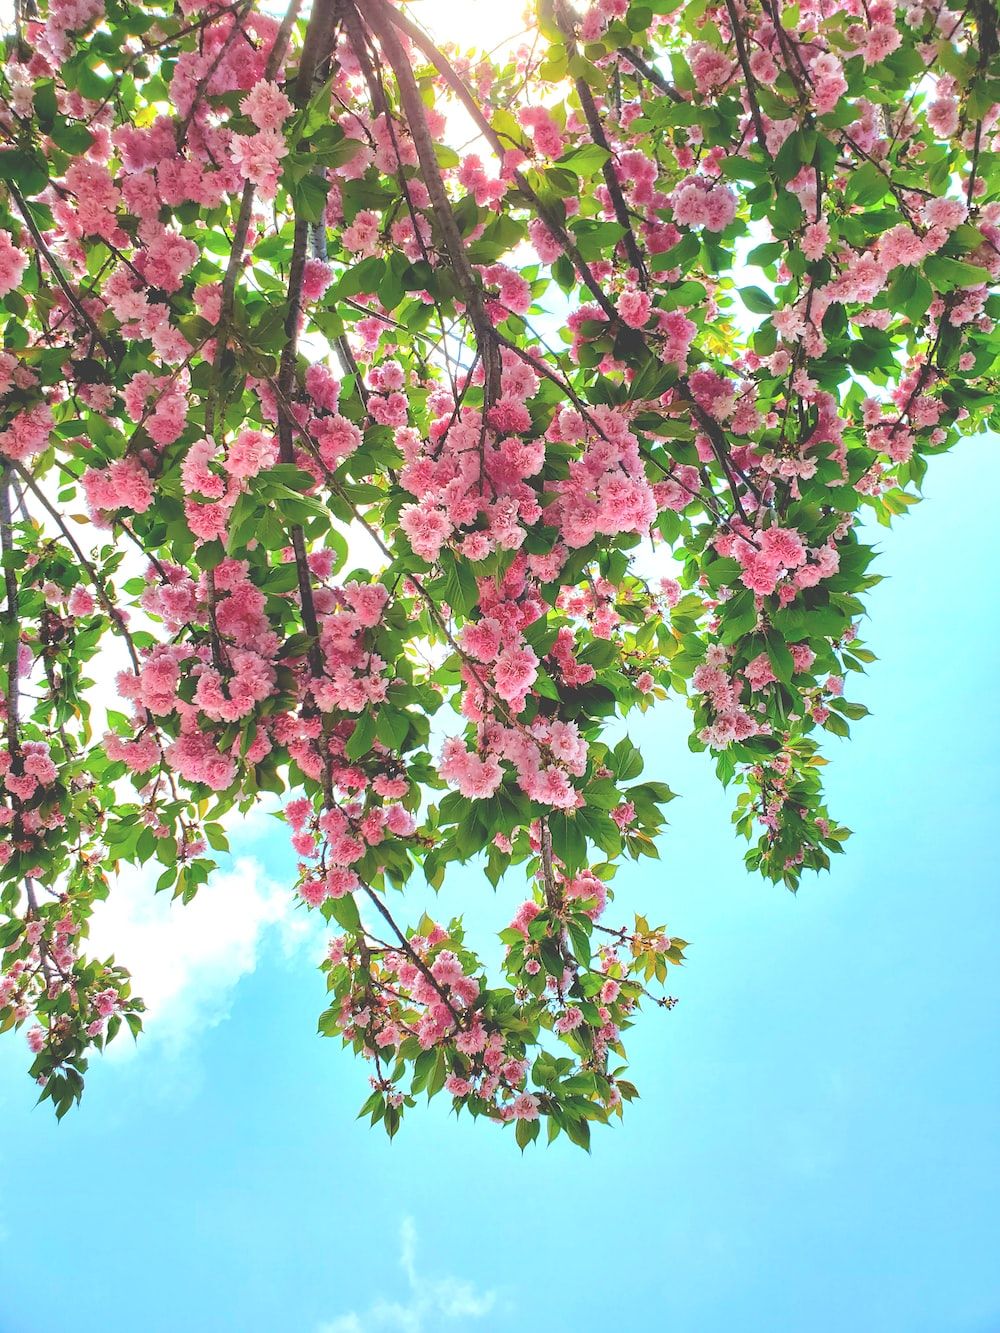 A beautiful cherry blossom tree with pink flowers and green leaves. - Spring